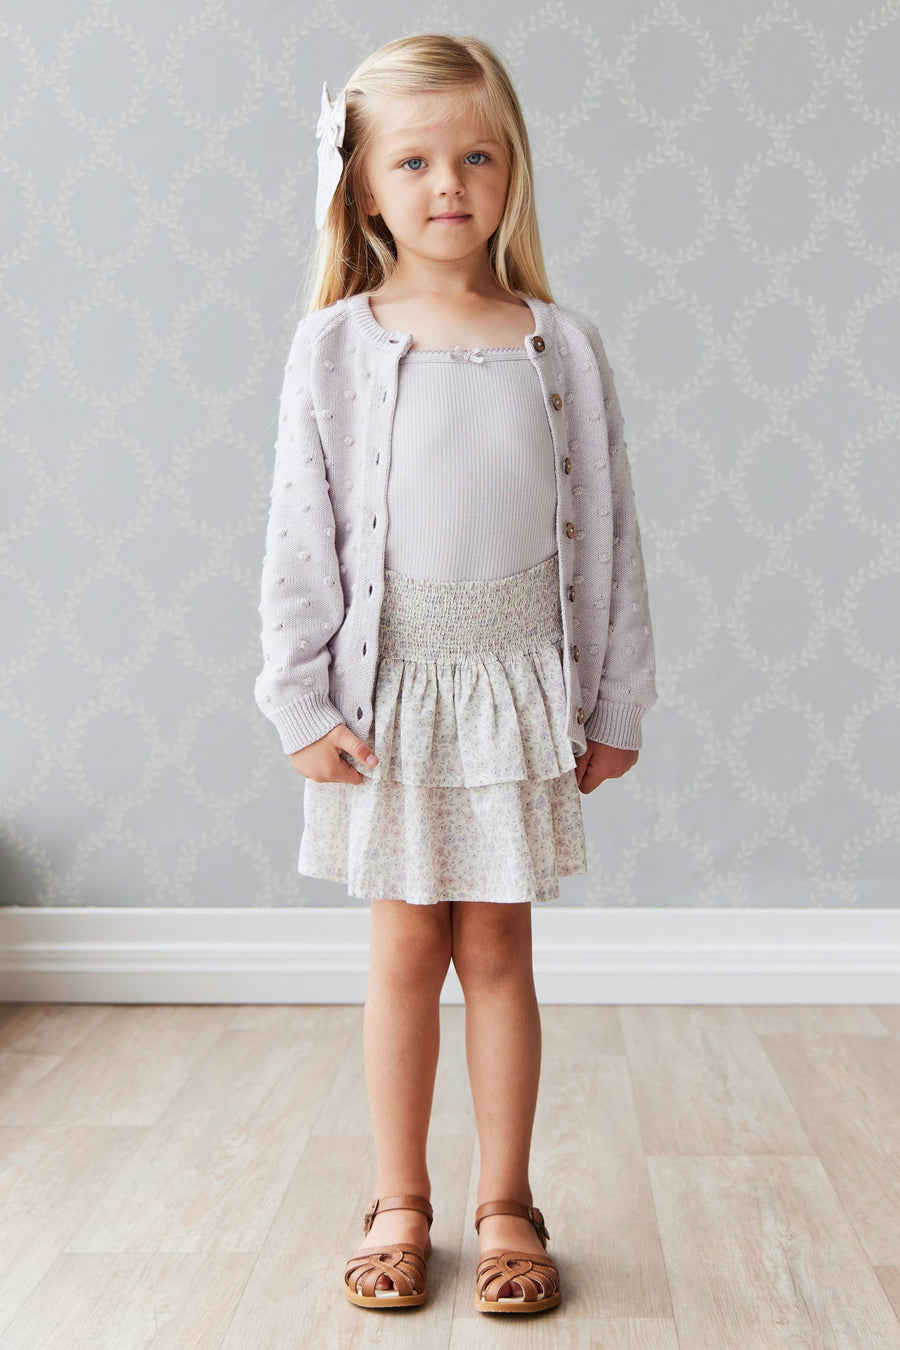 OG Dotty Knit Cardigan - Pale Lilac Marle Childrens Cardigan from Jamie Kay USA